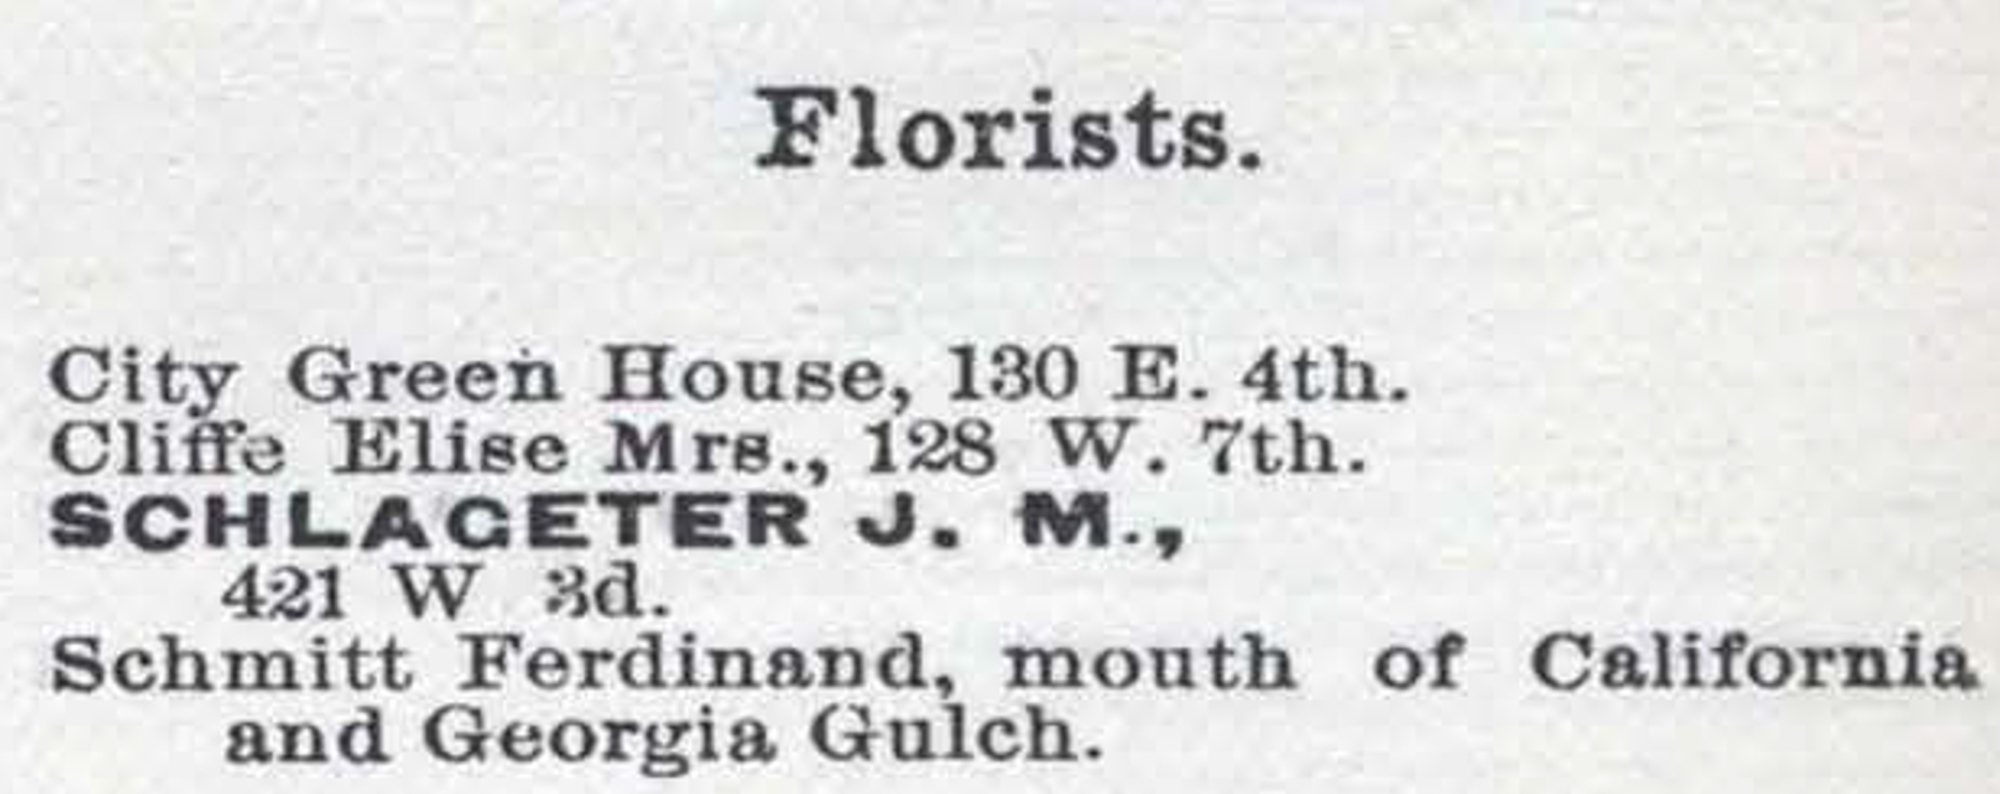 Dauth Family Archive - 1888 - Leadville Directory - Entry for Elisabeth Dauth Florist